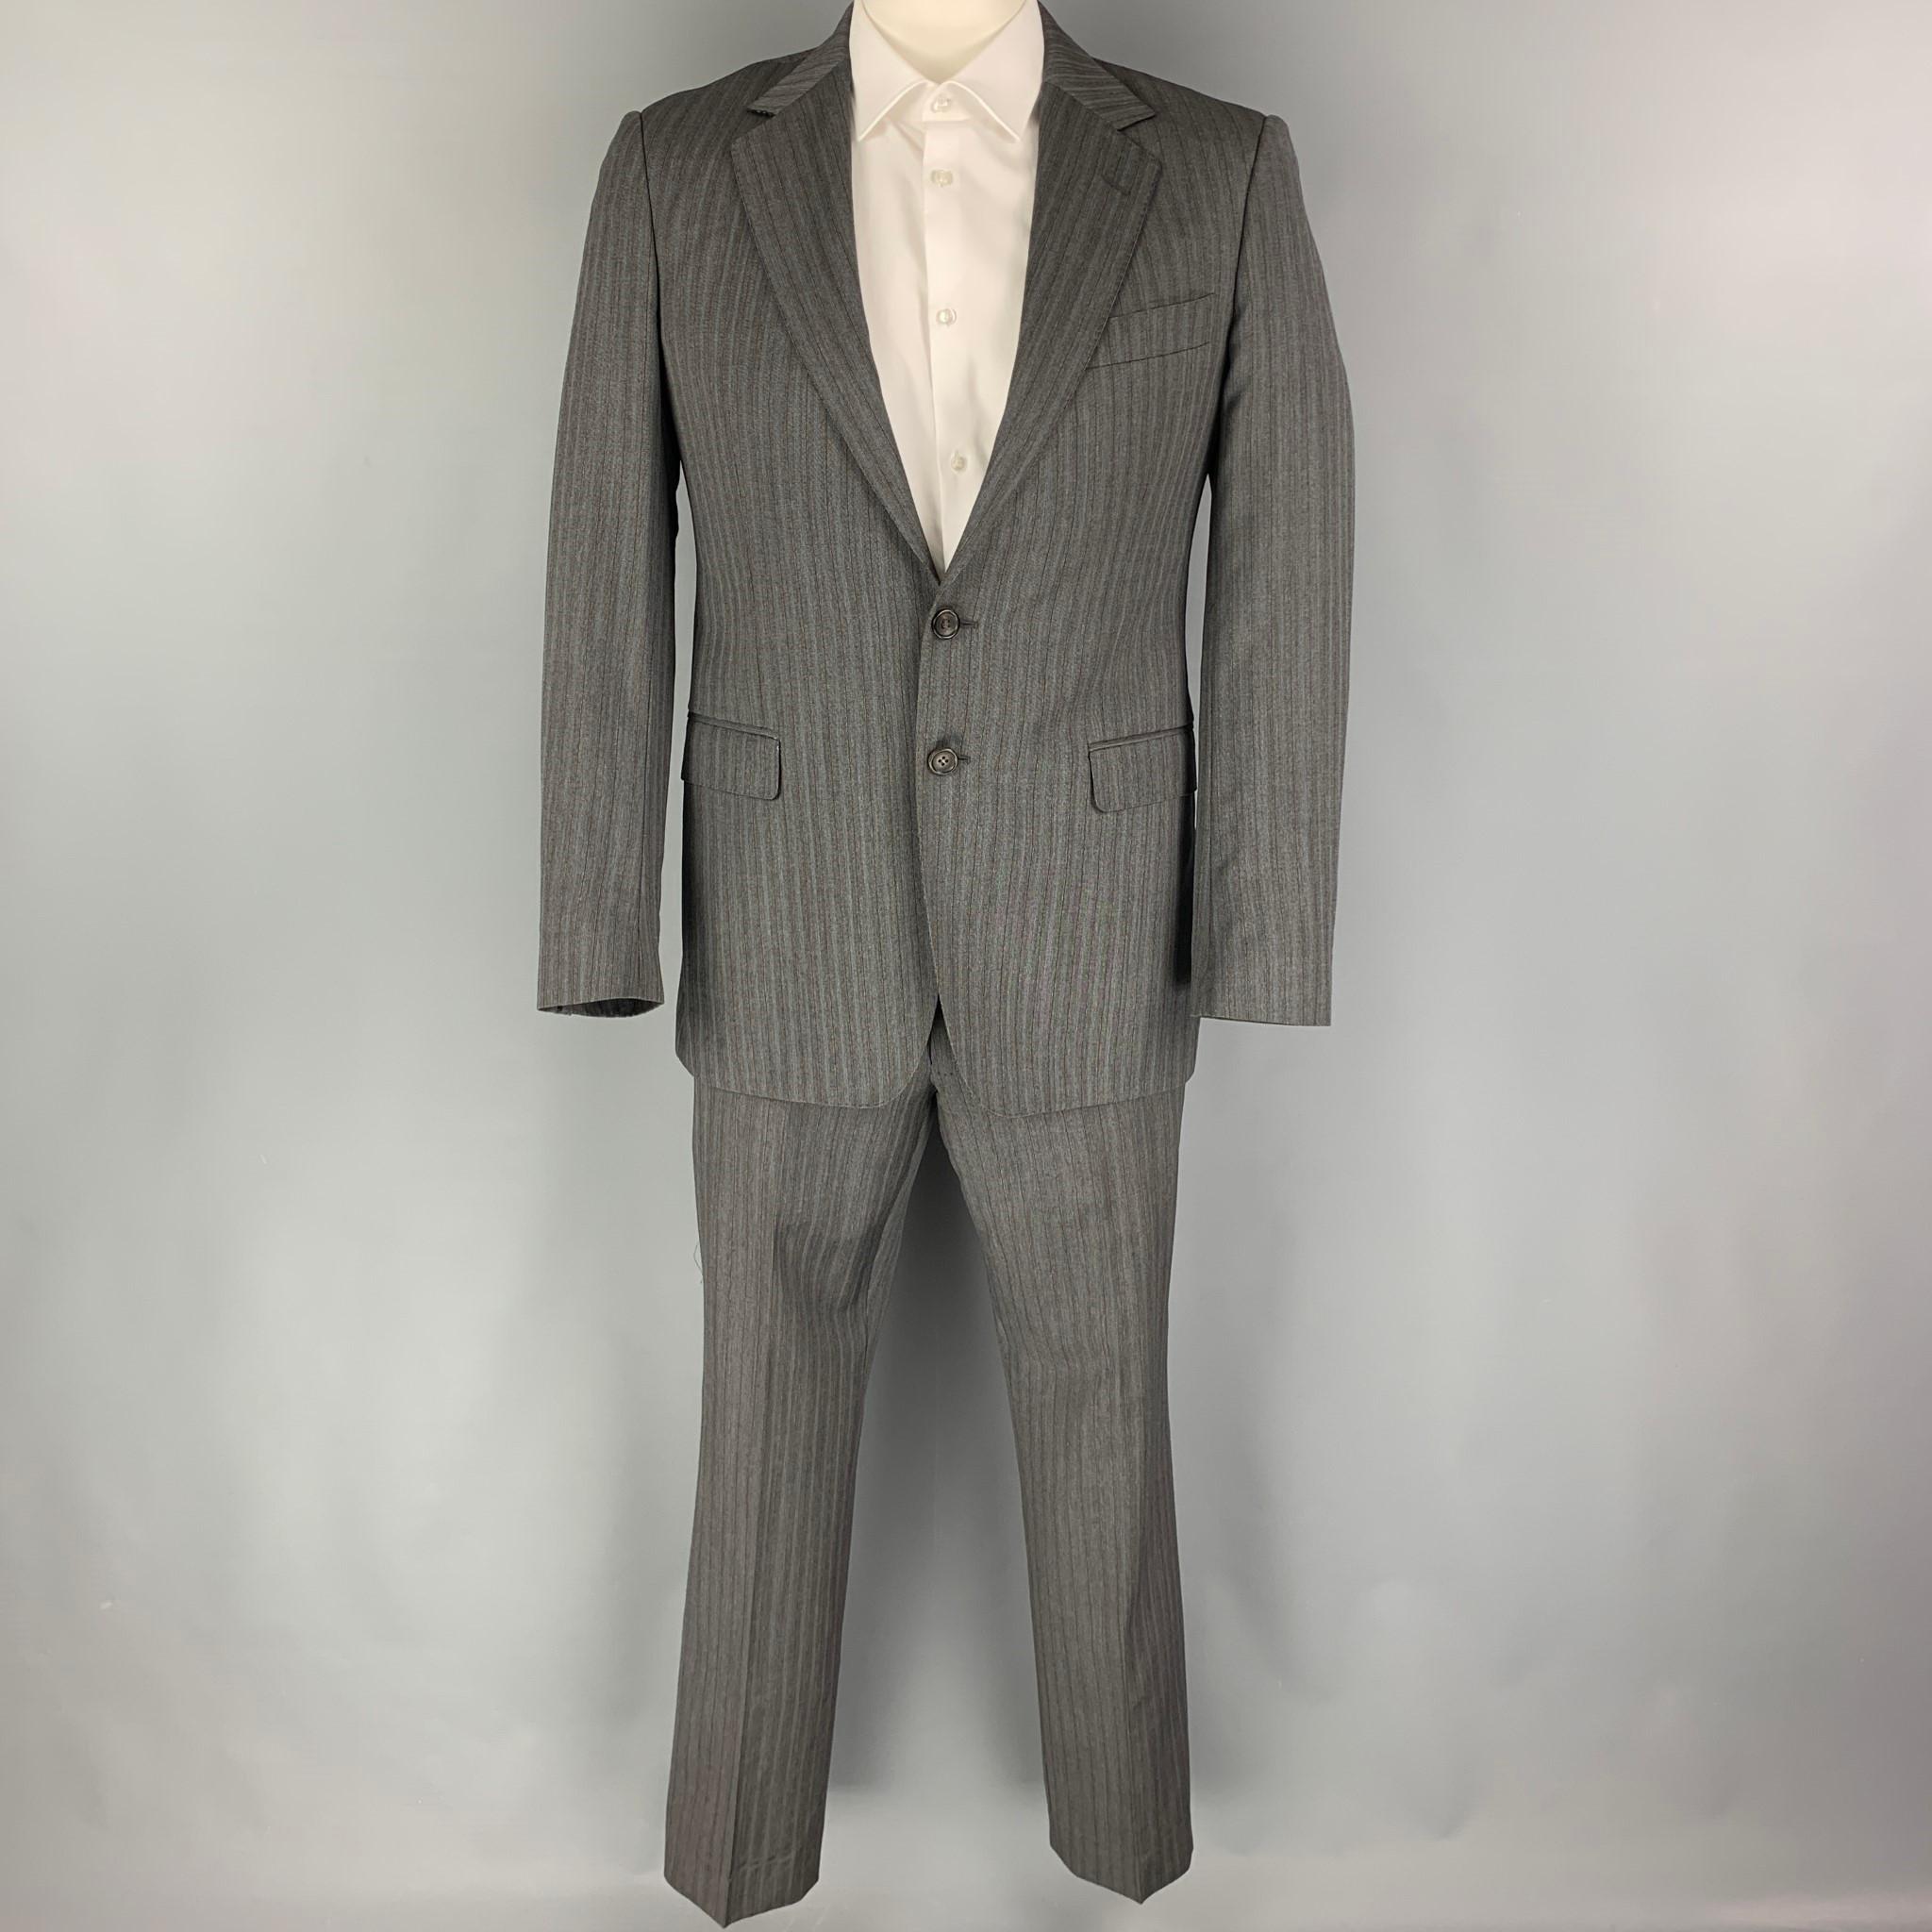 GUCCI suit comes in a grey & blue stripe wool with a full liner and includes a single breasted, double button sport coat with a notch lapel and matching flat front trousers.

Good Pre-Owned Condition. Moderate wear at pants interior. As-is.
Marked: